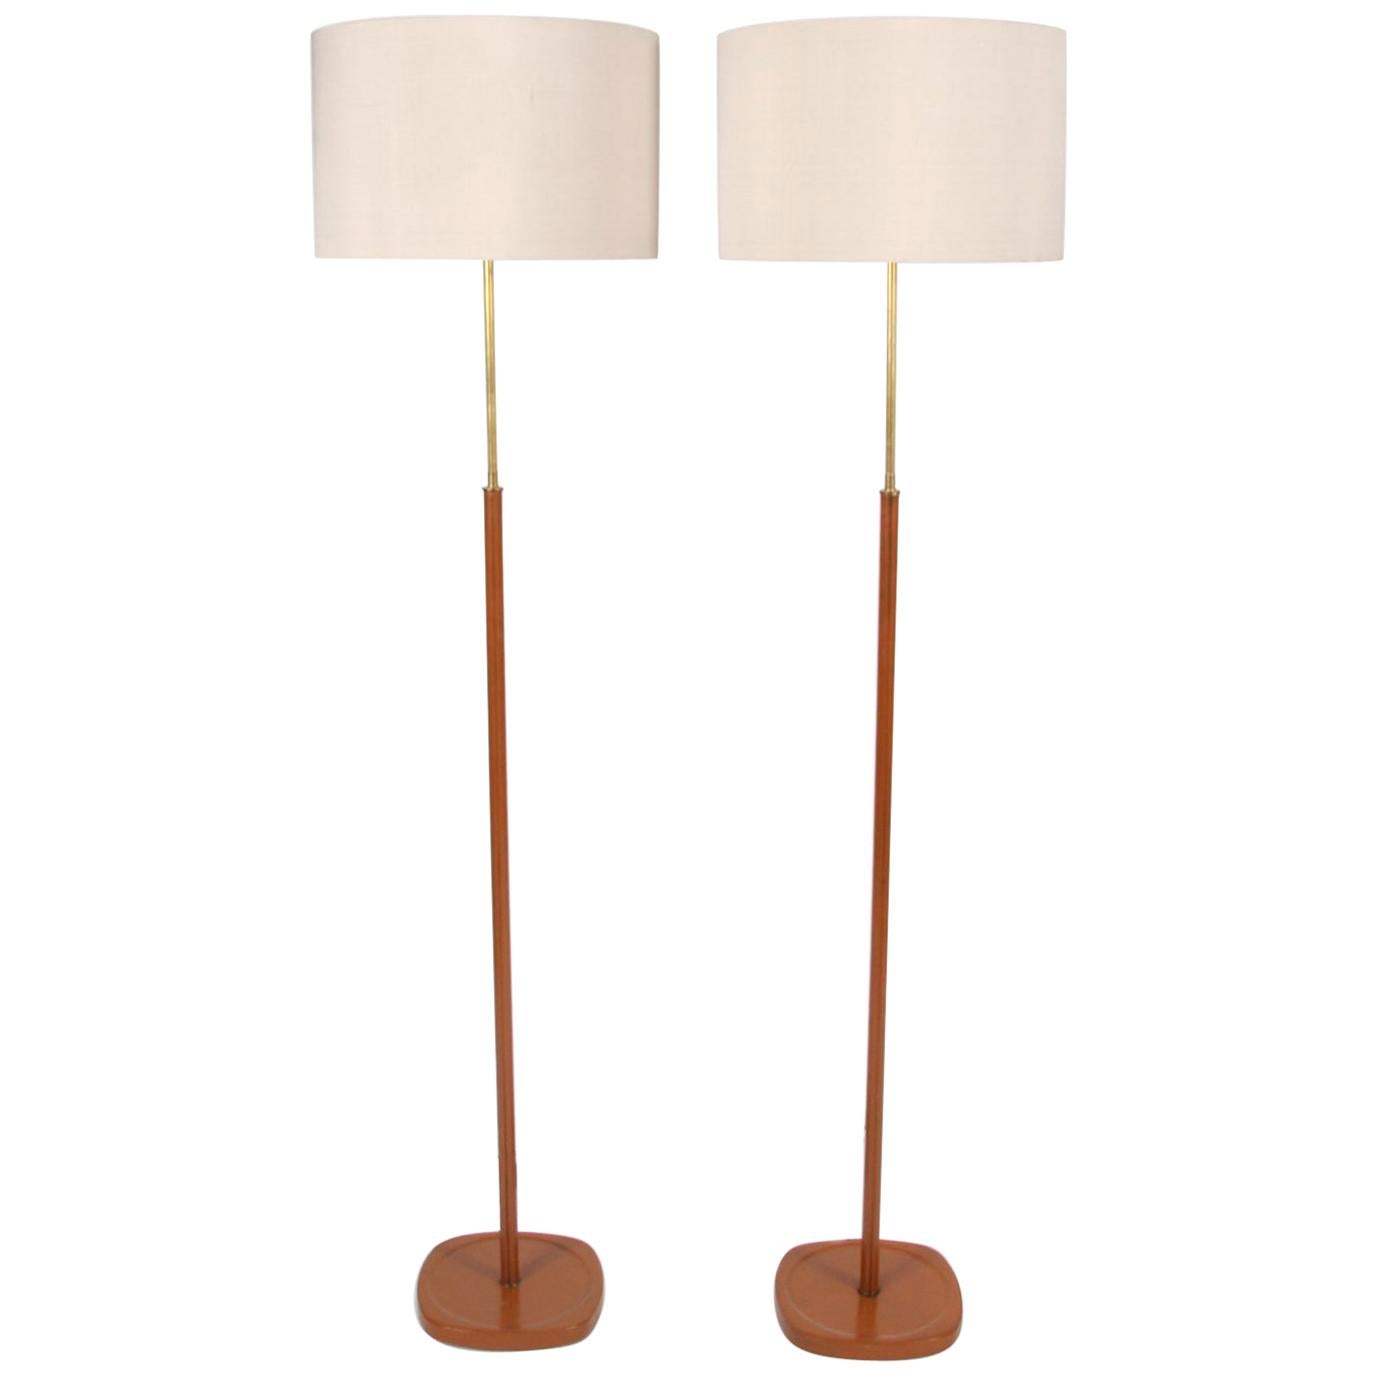 Pair of Swedish Vintage 1960s Tan Stitched Leather Floor Lamps